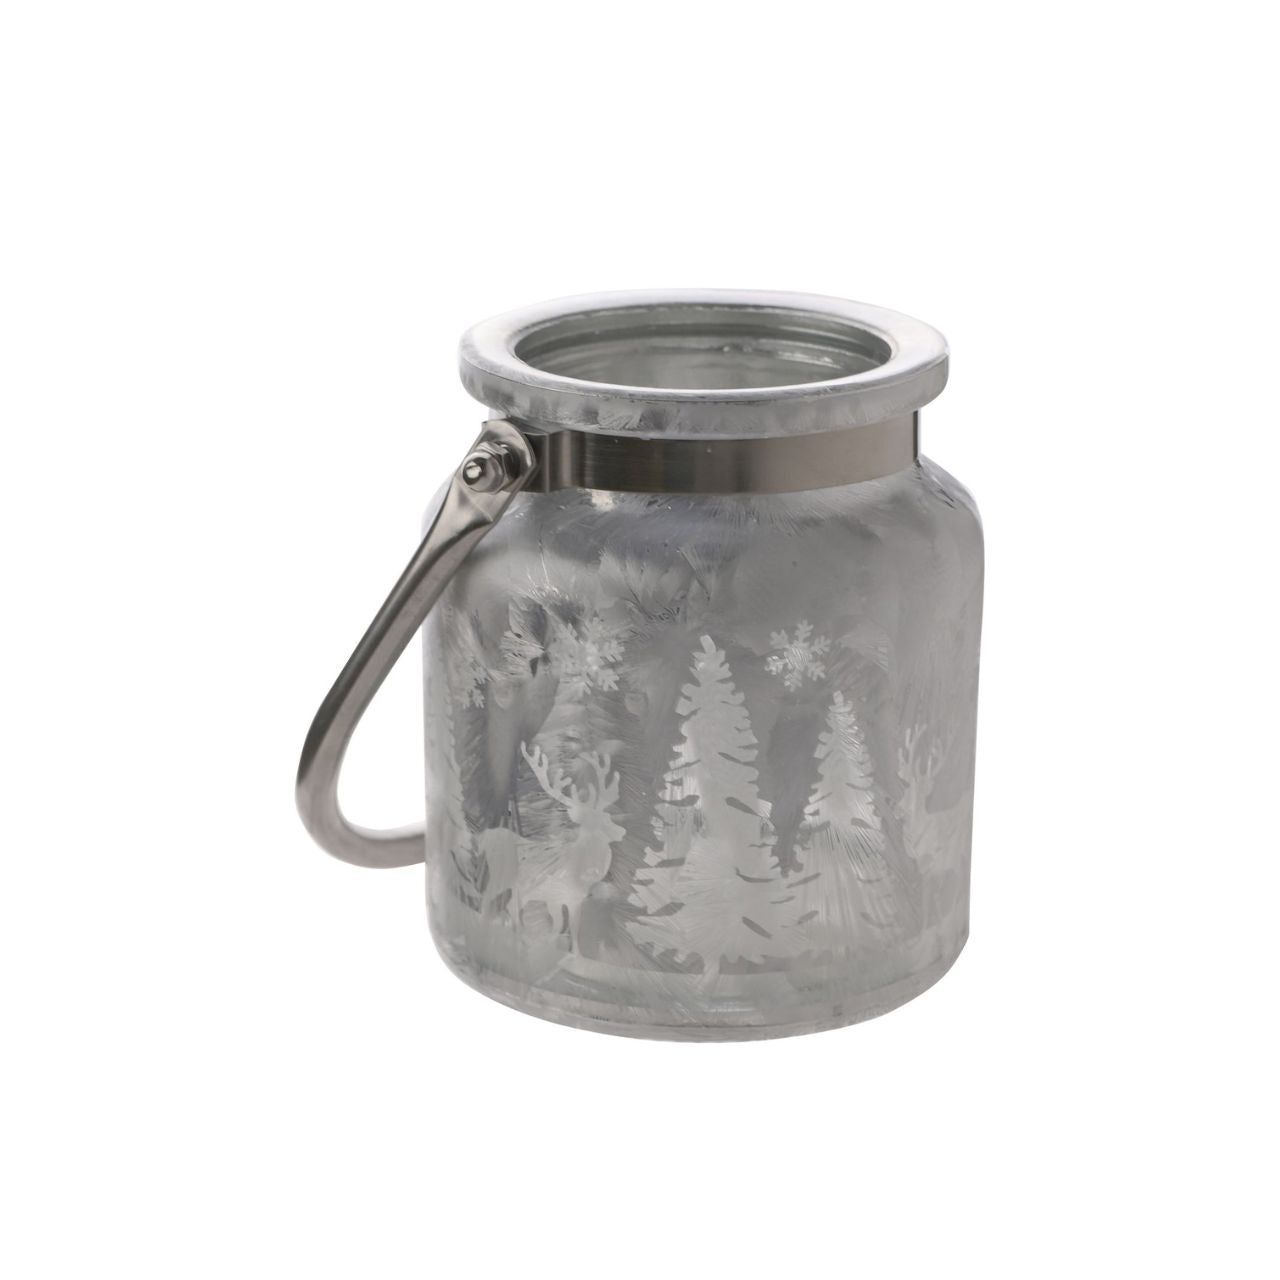 Christmas Frosted Reindeer Forest Scene Lantern with Handle  A frosted reindeer forest scene lantern with handle.  This enchanting lantern glistens with festive charm throughout the Christmas period.